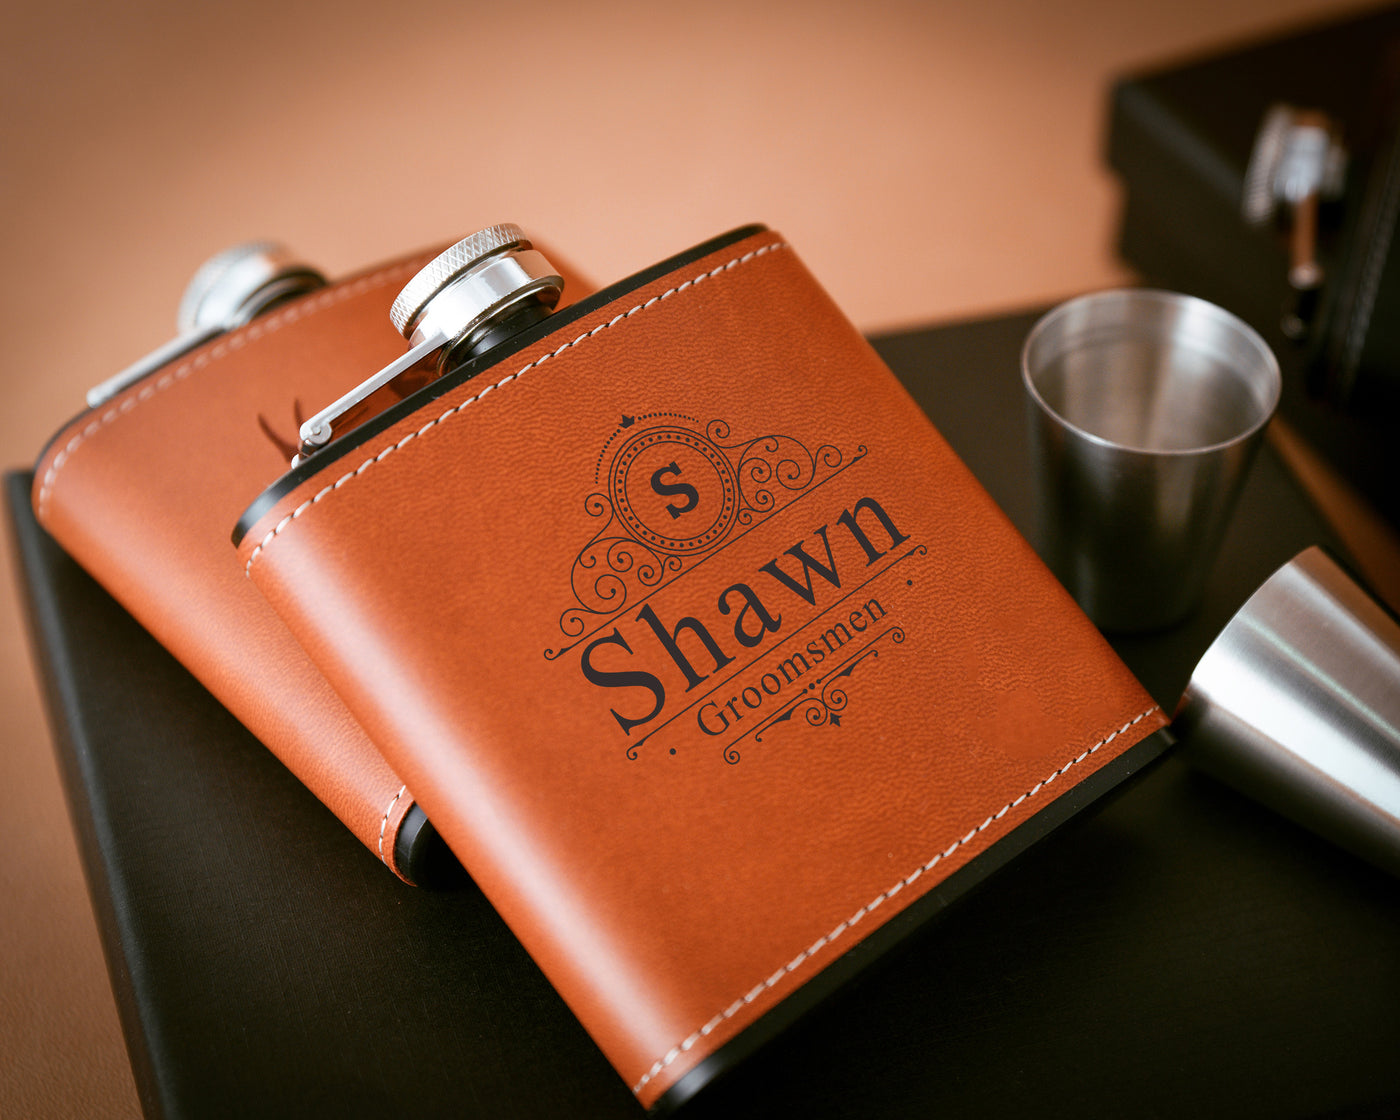 Classic Personalized Leather Stainless Steel Flask Set, Thoughtful Father of the Bride Gift - A Delightful Thank You from the Groomsmen